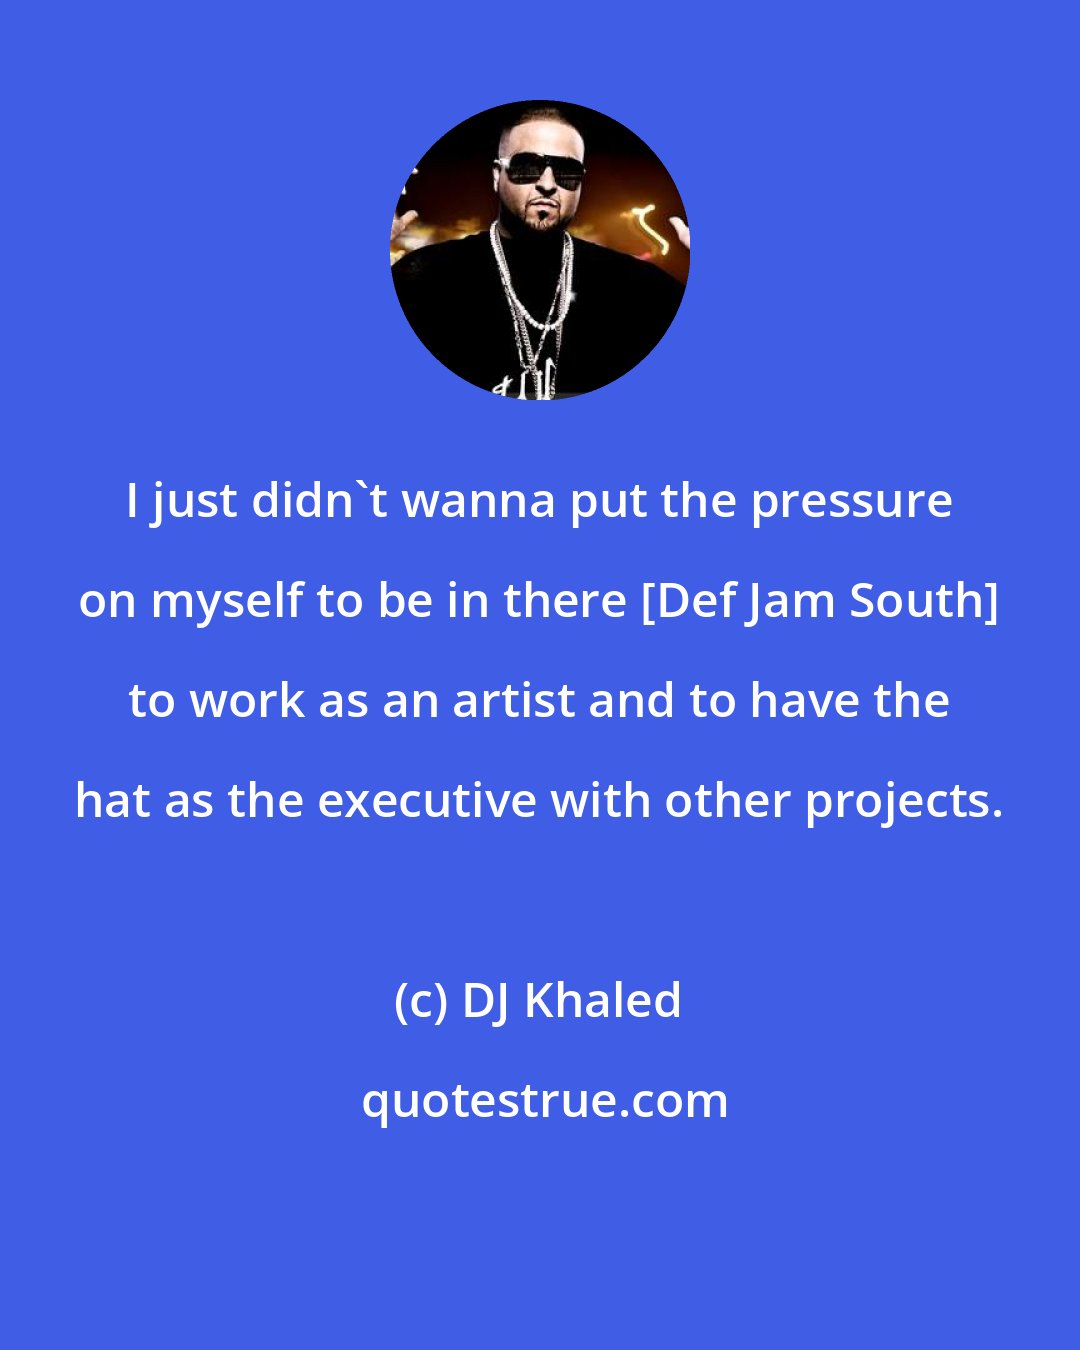 DJ Khaled: I just didn't wanna put the pressure on myself to be in there [Def Jam South] to work as an artist and to have the hat as the executive with other projects.